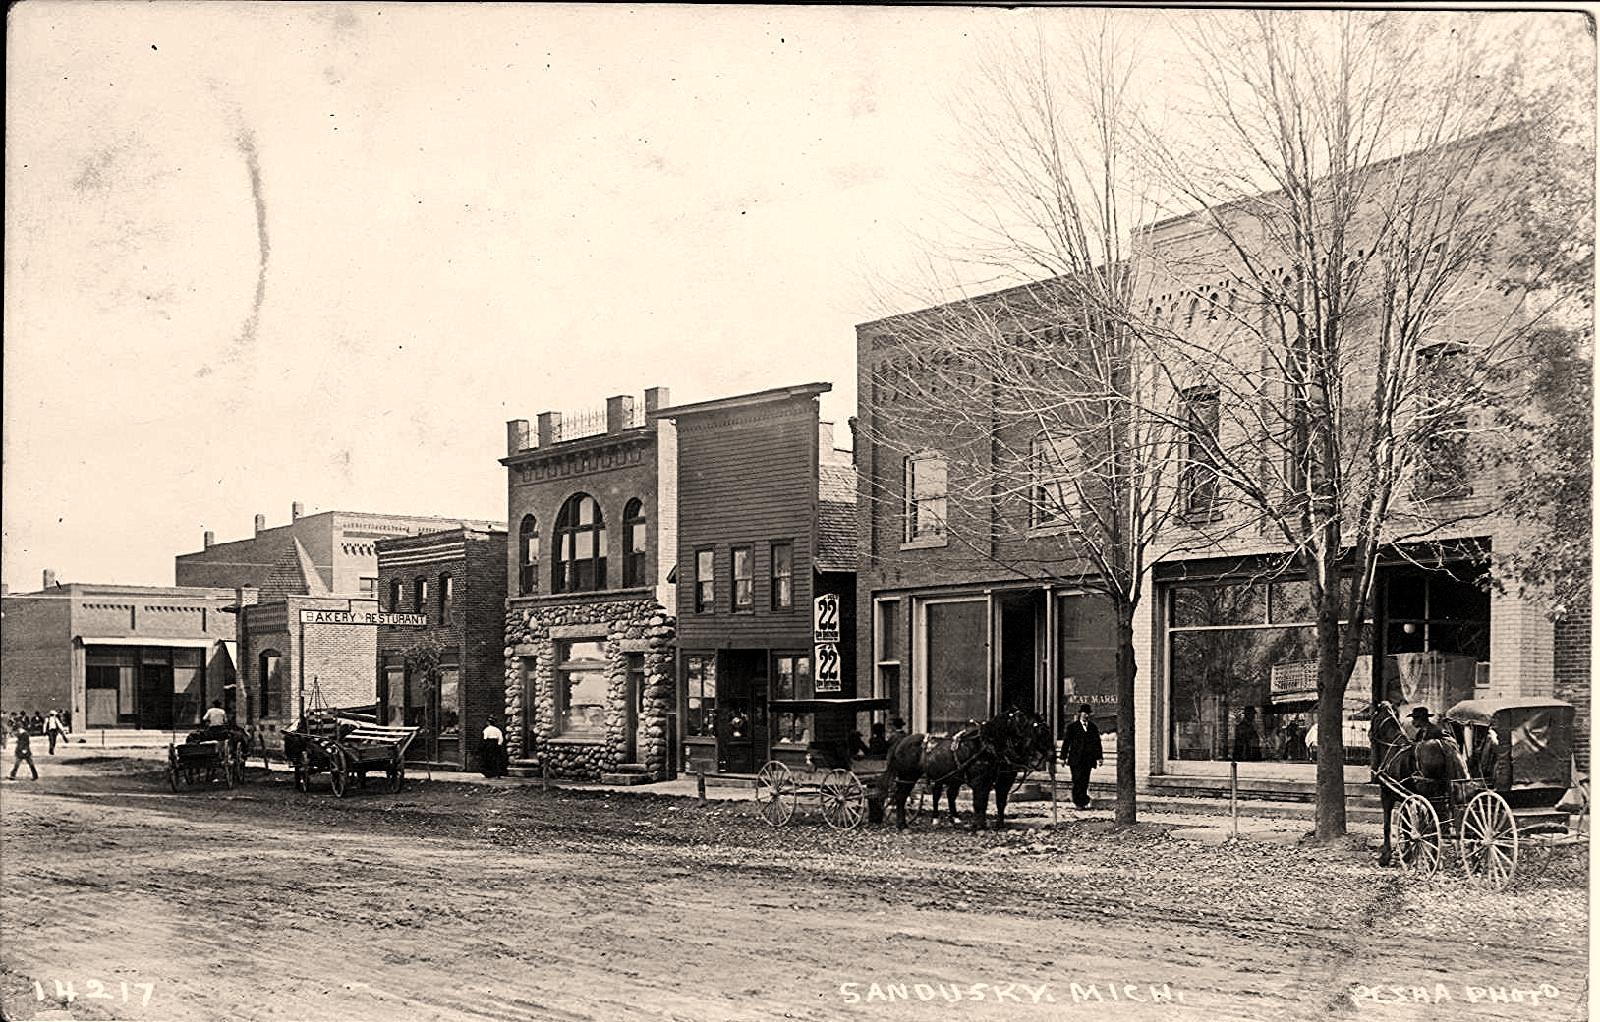 the old fashioned pograph shows horses in front of small buildings